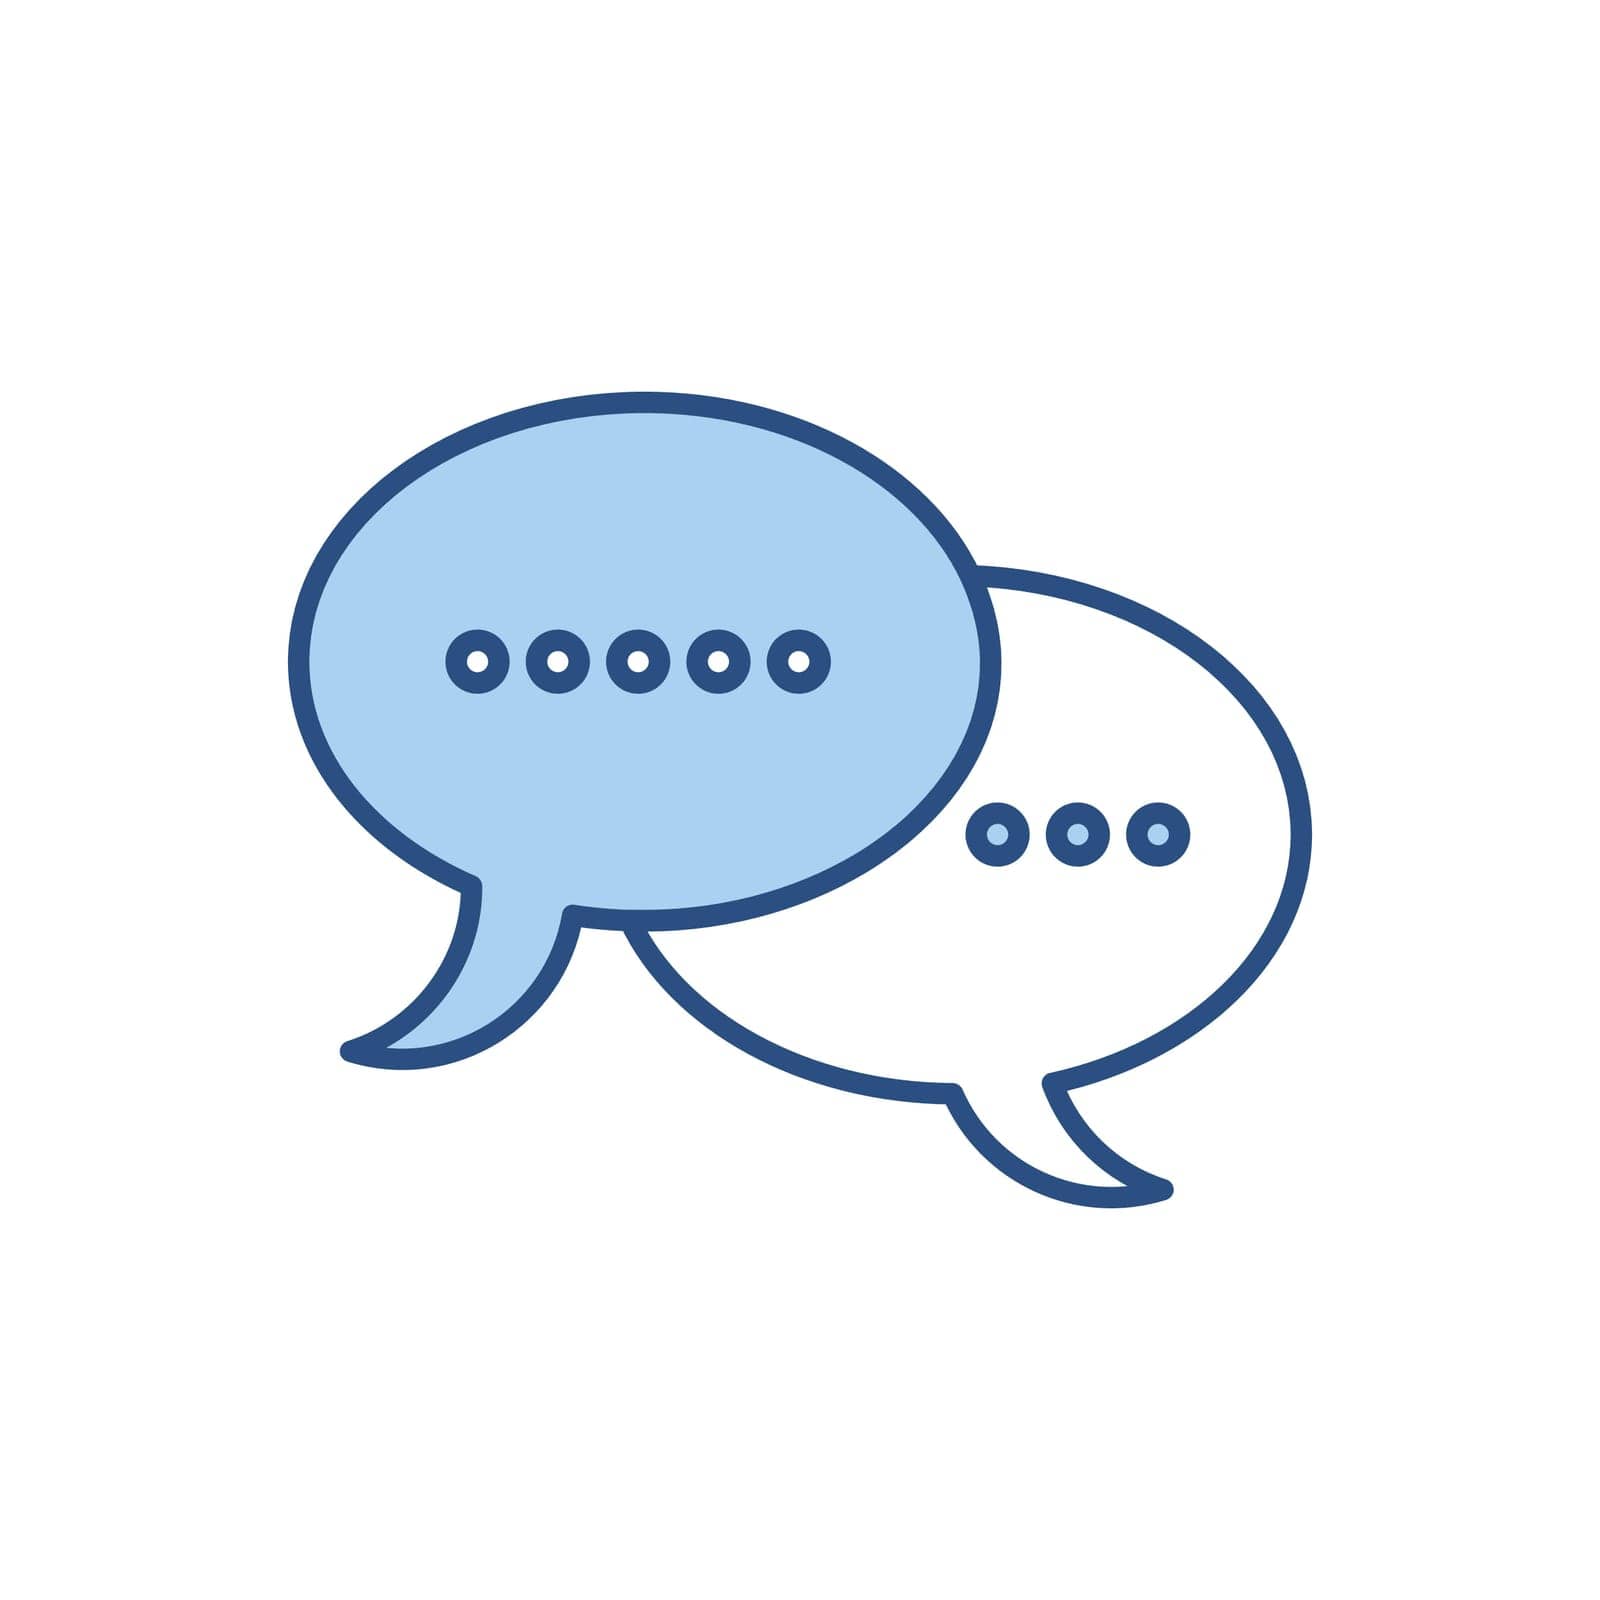 Speech Bubble Flat related vector icon by smoki